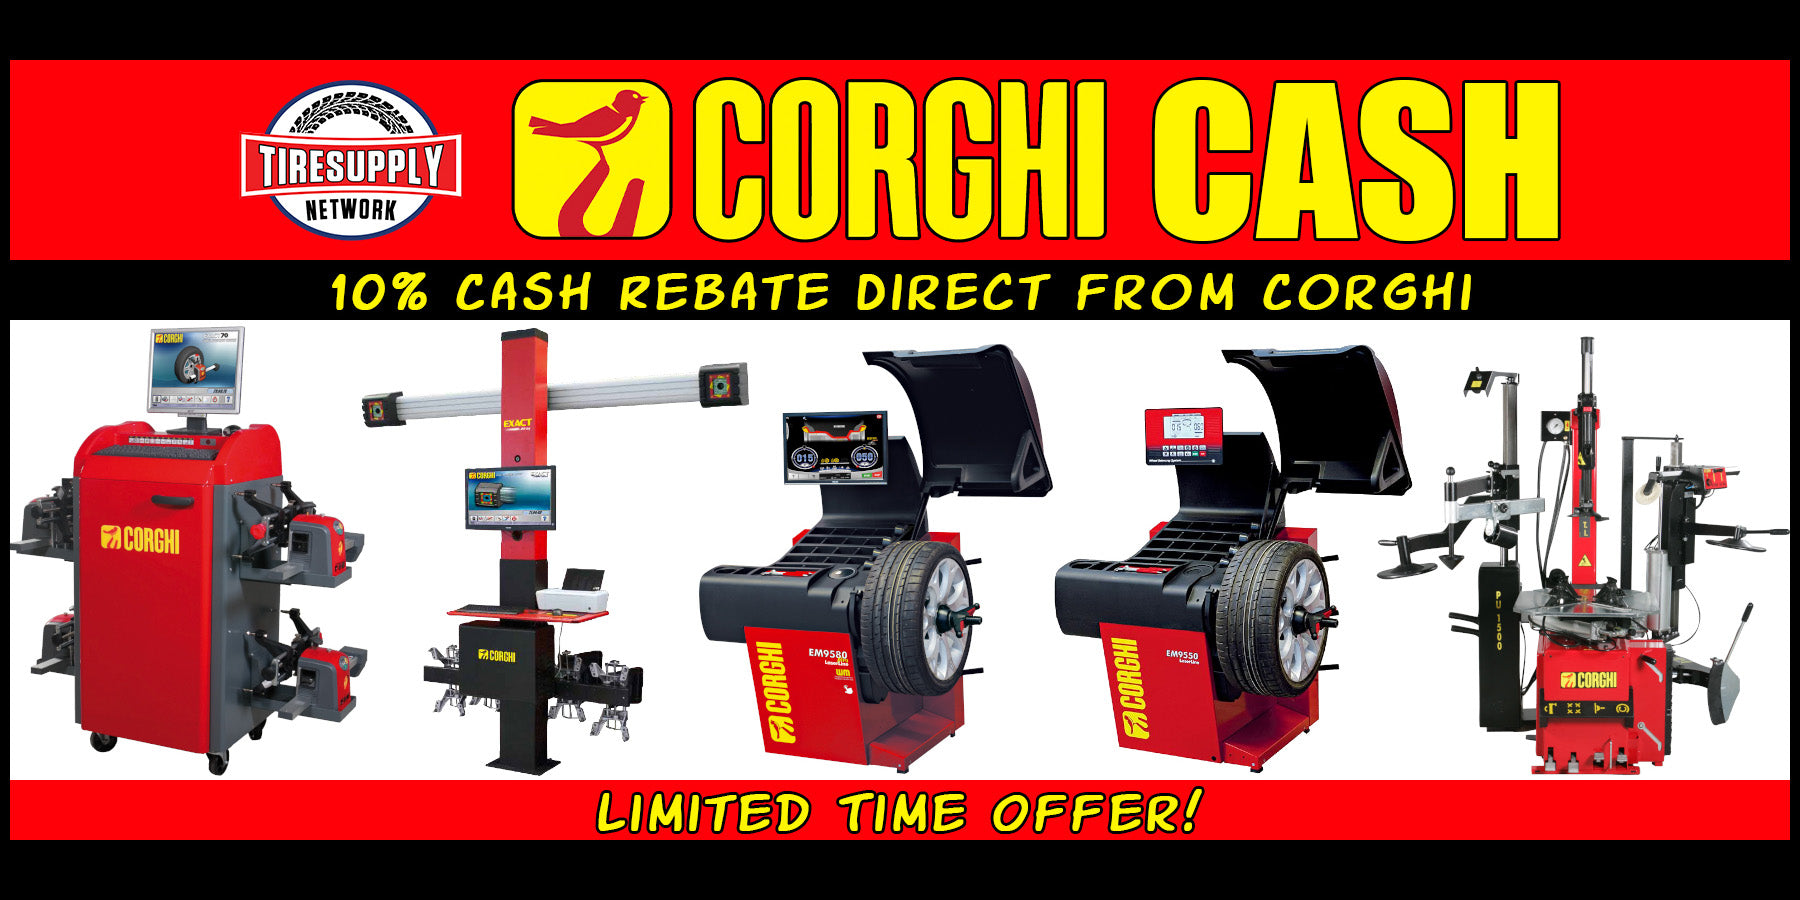 Get 10% Cash Rebate on Your Corghi Purchase or 0% Financing for 24 Months - Limited Time Offer!